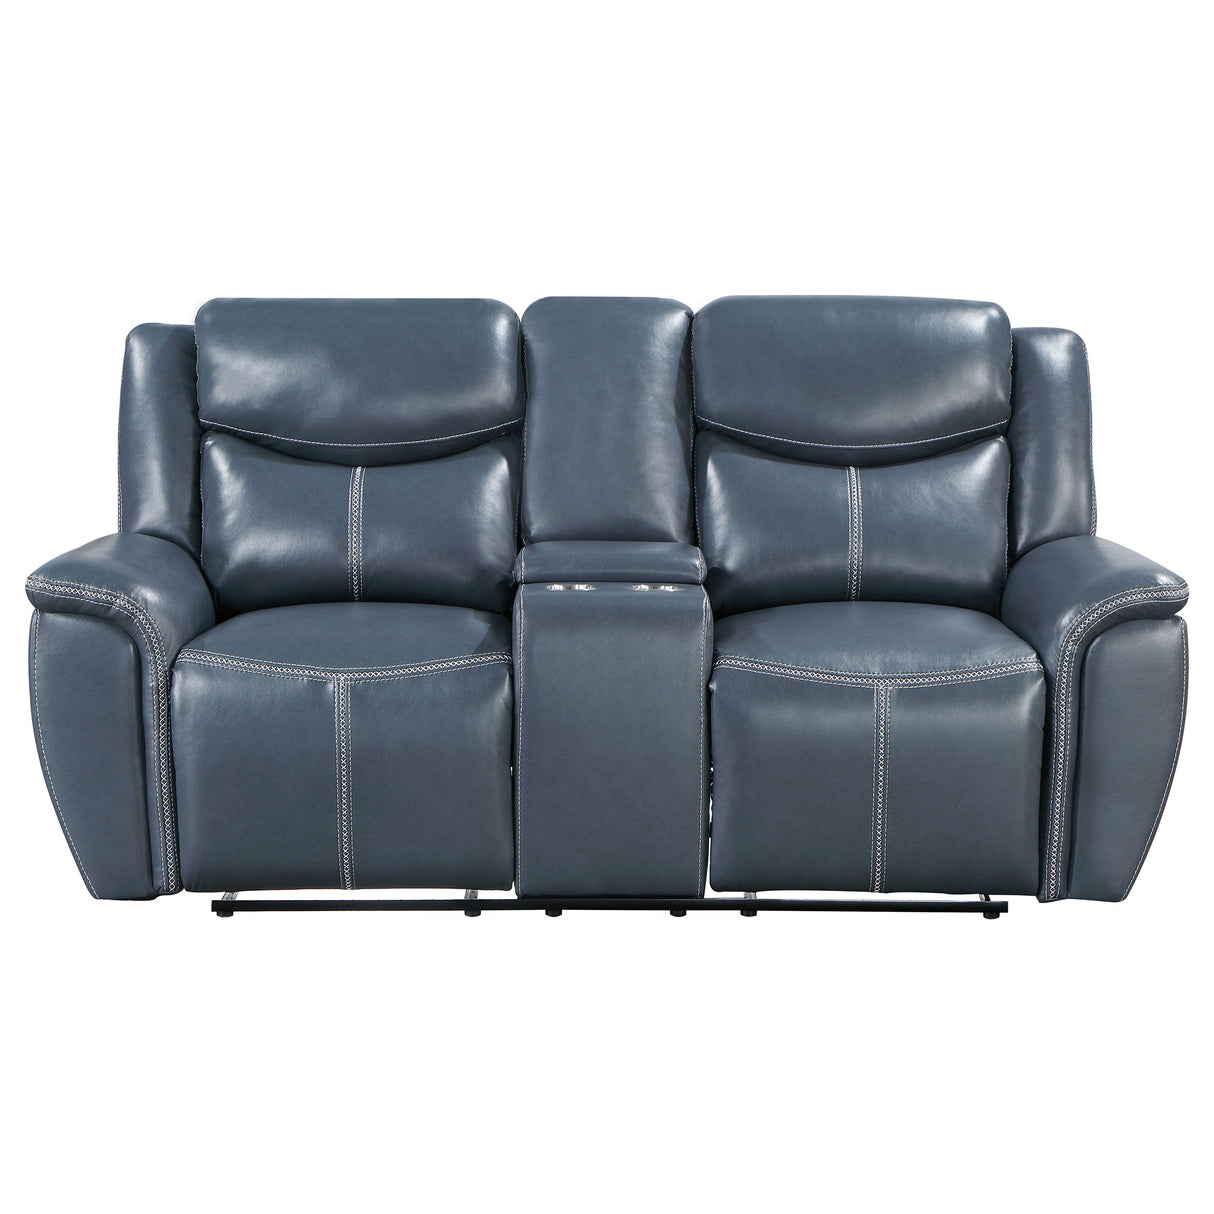 Motion Loveseat - Sloane Upholstered Motion Reclining Loveseat with Console Blue